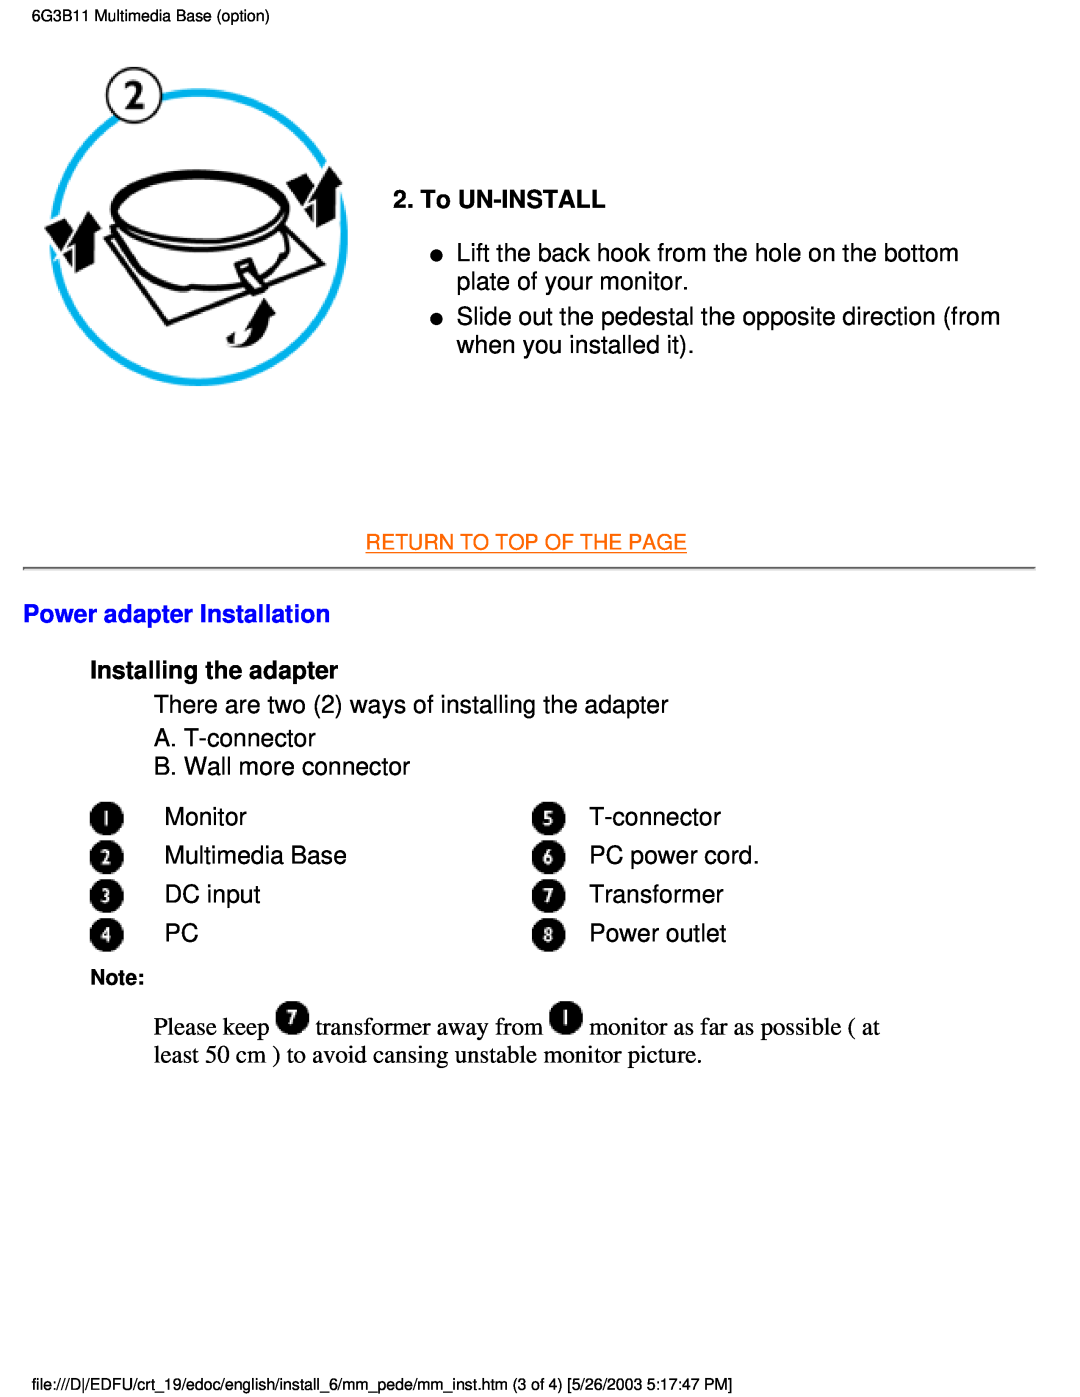 Philips 109E5 user manual To UN-INSTALL, Power adapter Installation, Installing the adapter 